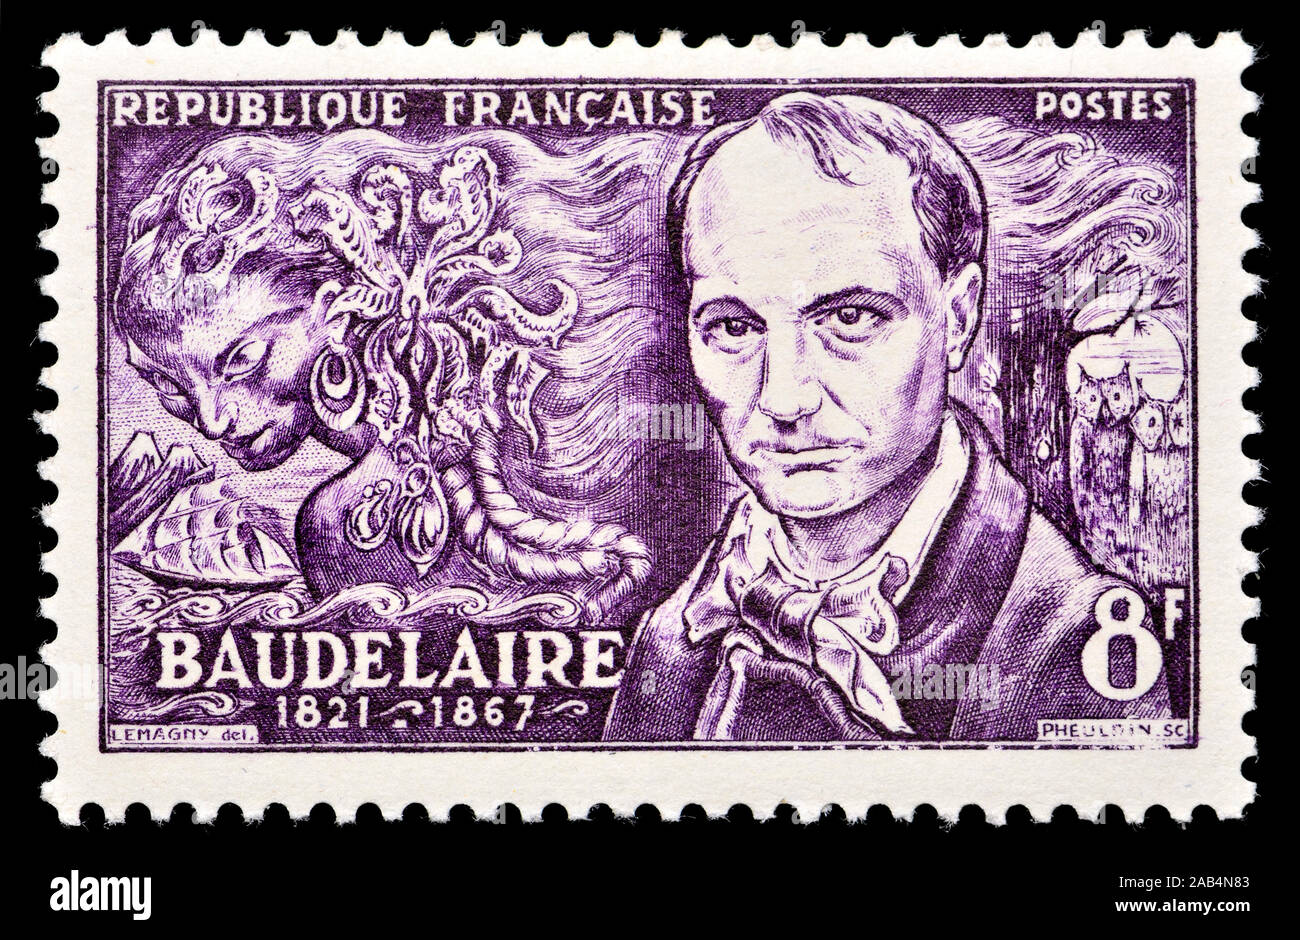 French postage stamp (1951) : Charles Pierre Baudelaire (1821 – 1867) French poet, essayist, art critic, and translator of Edgar Allan Poe. Stock Photo